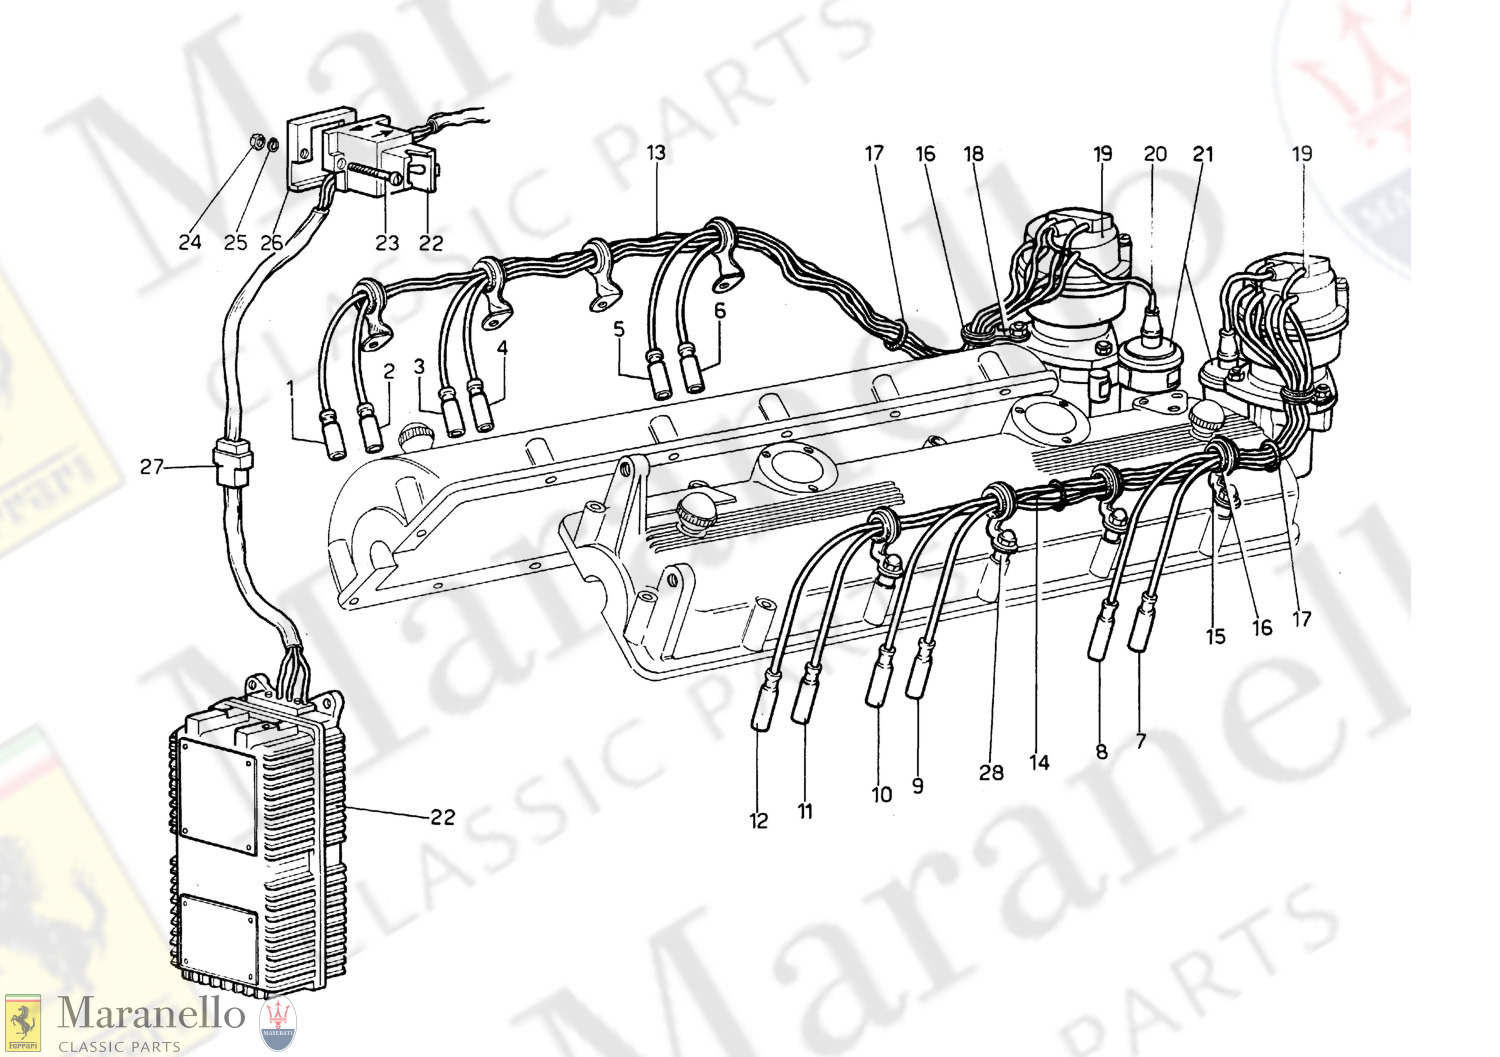 047 - Ignition System With Emissions Control